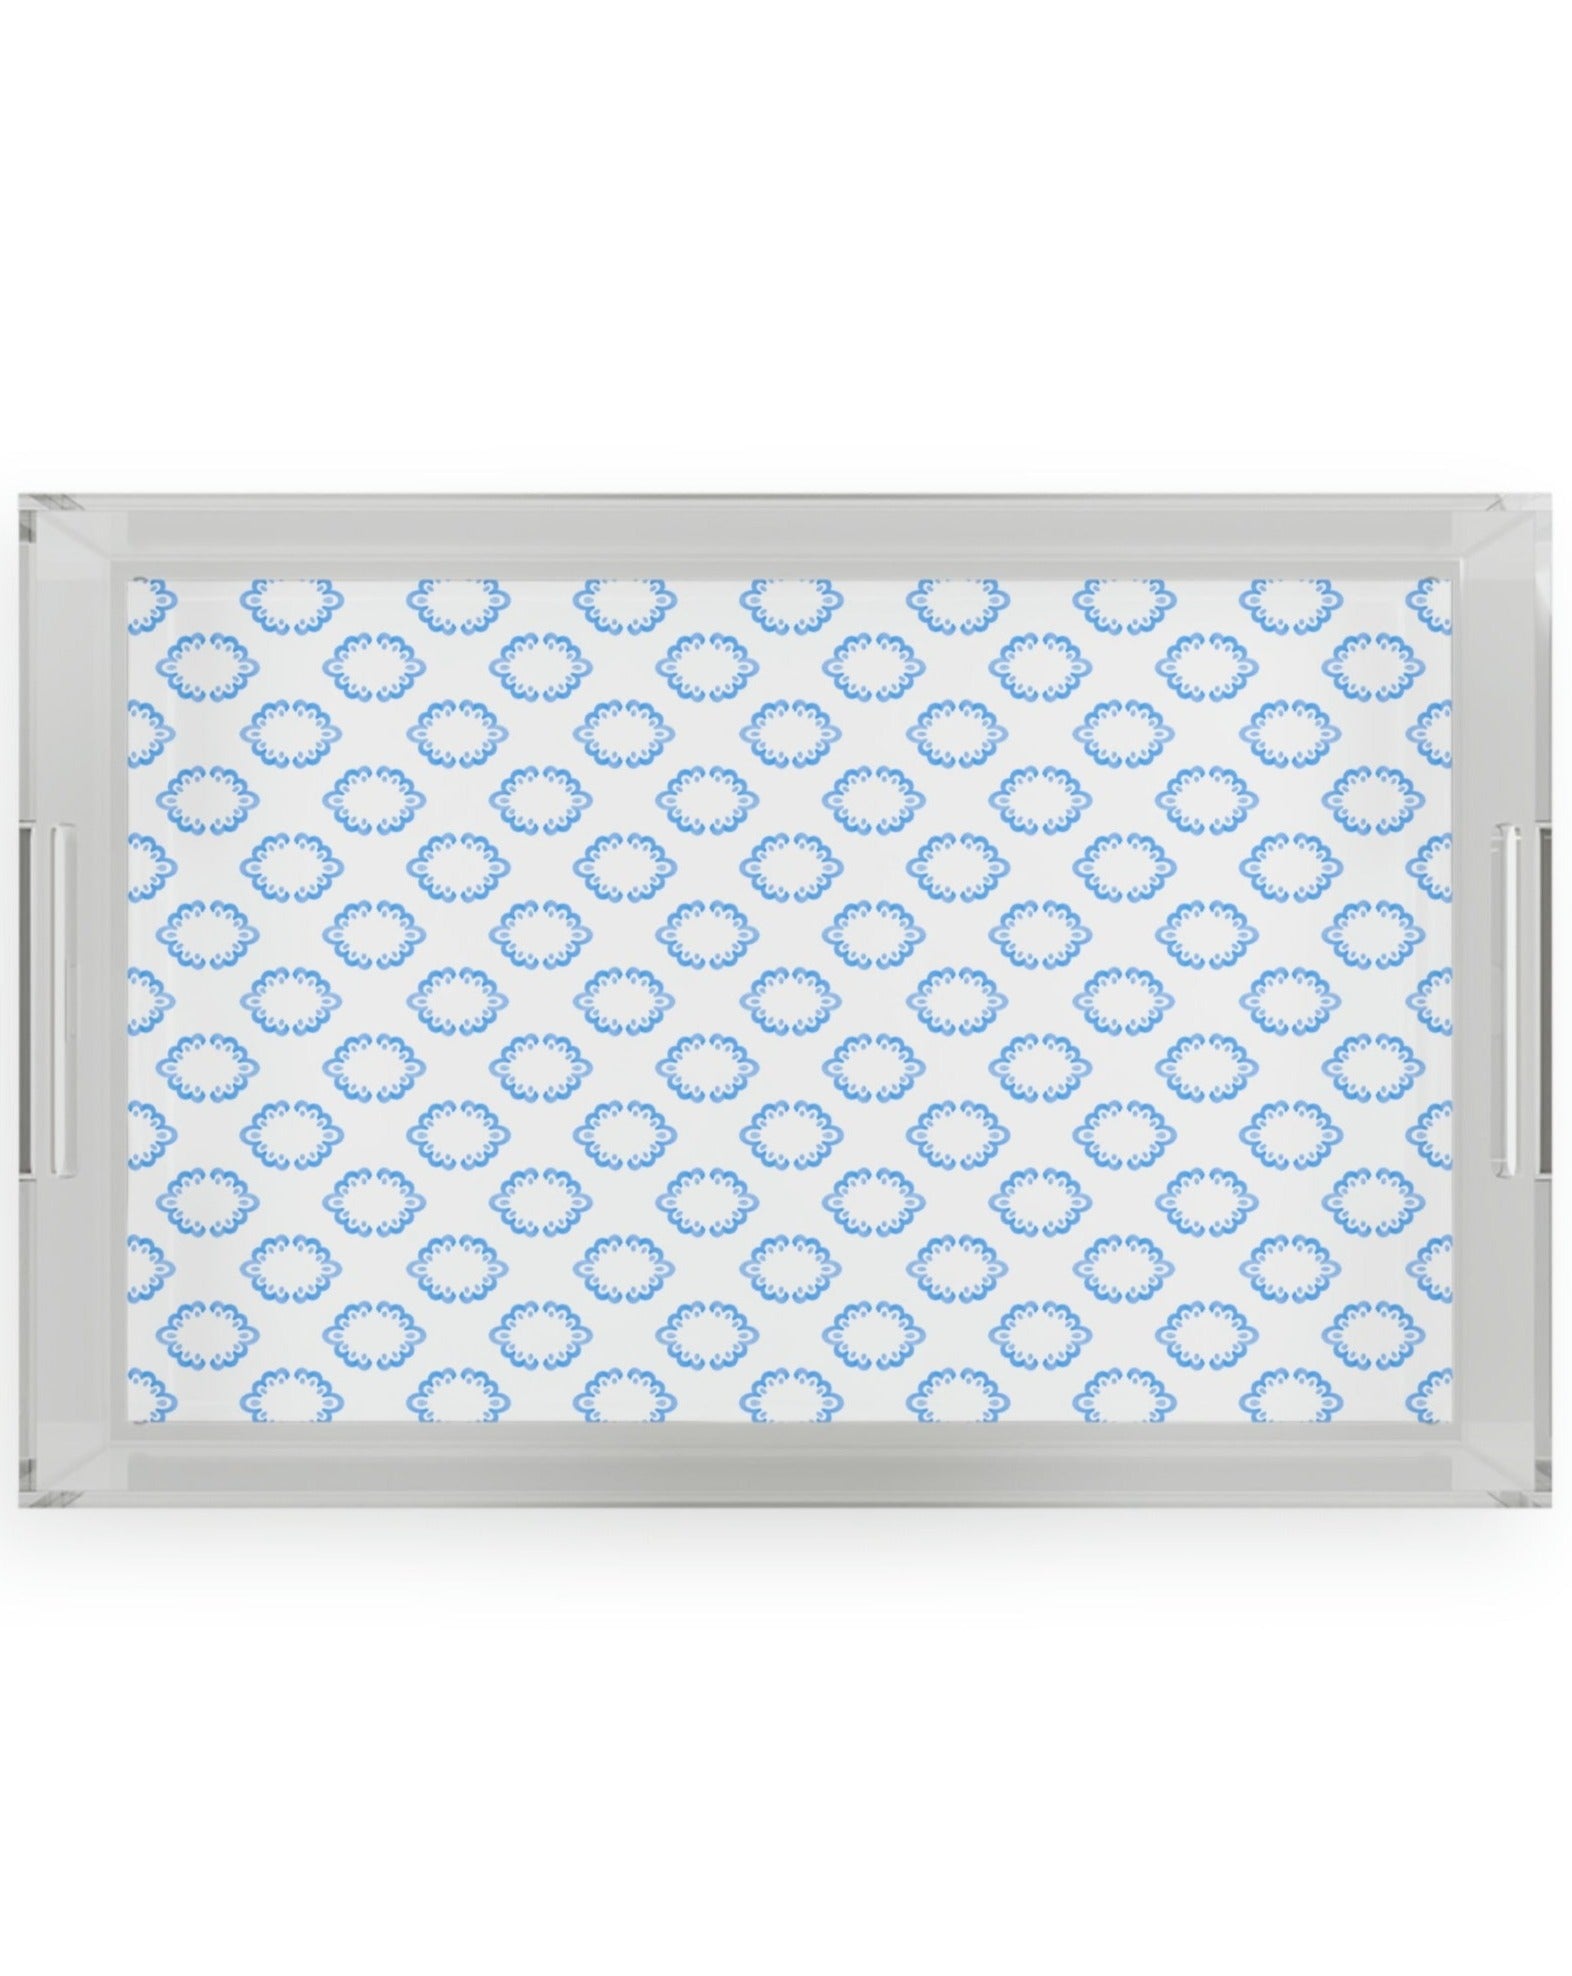 Serving Tray - Blue China - BRYKNOLO LLC Home Decor 11" x 17" / Clear